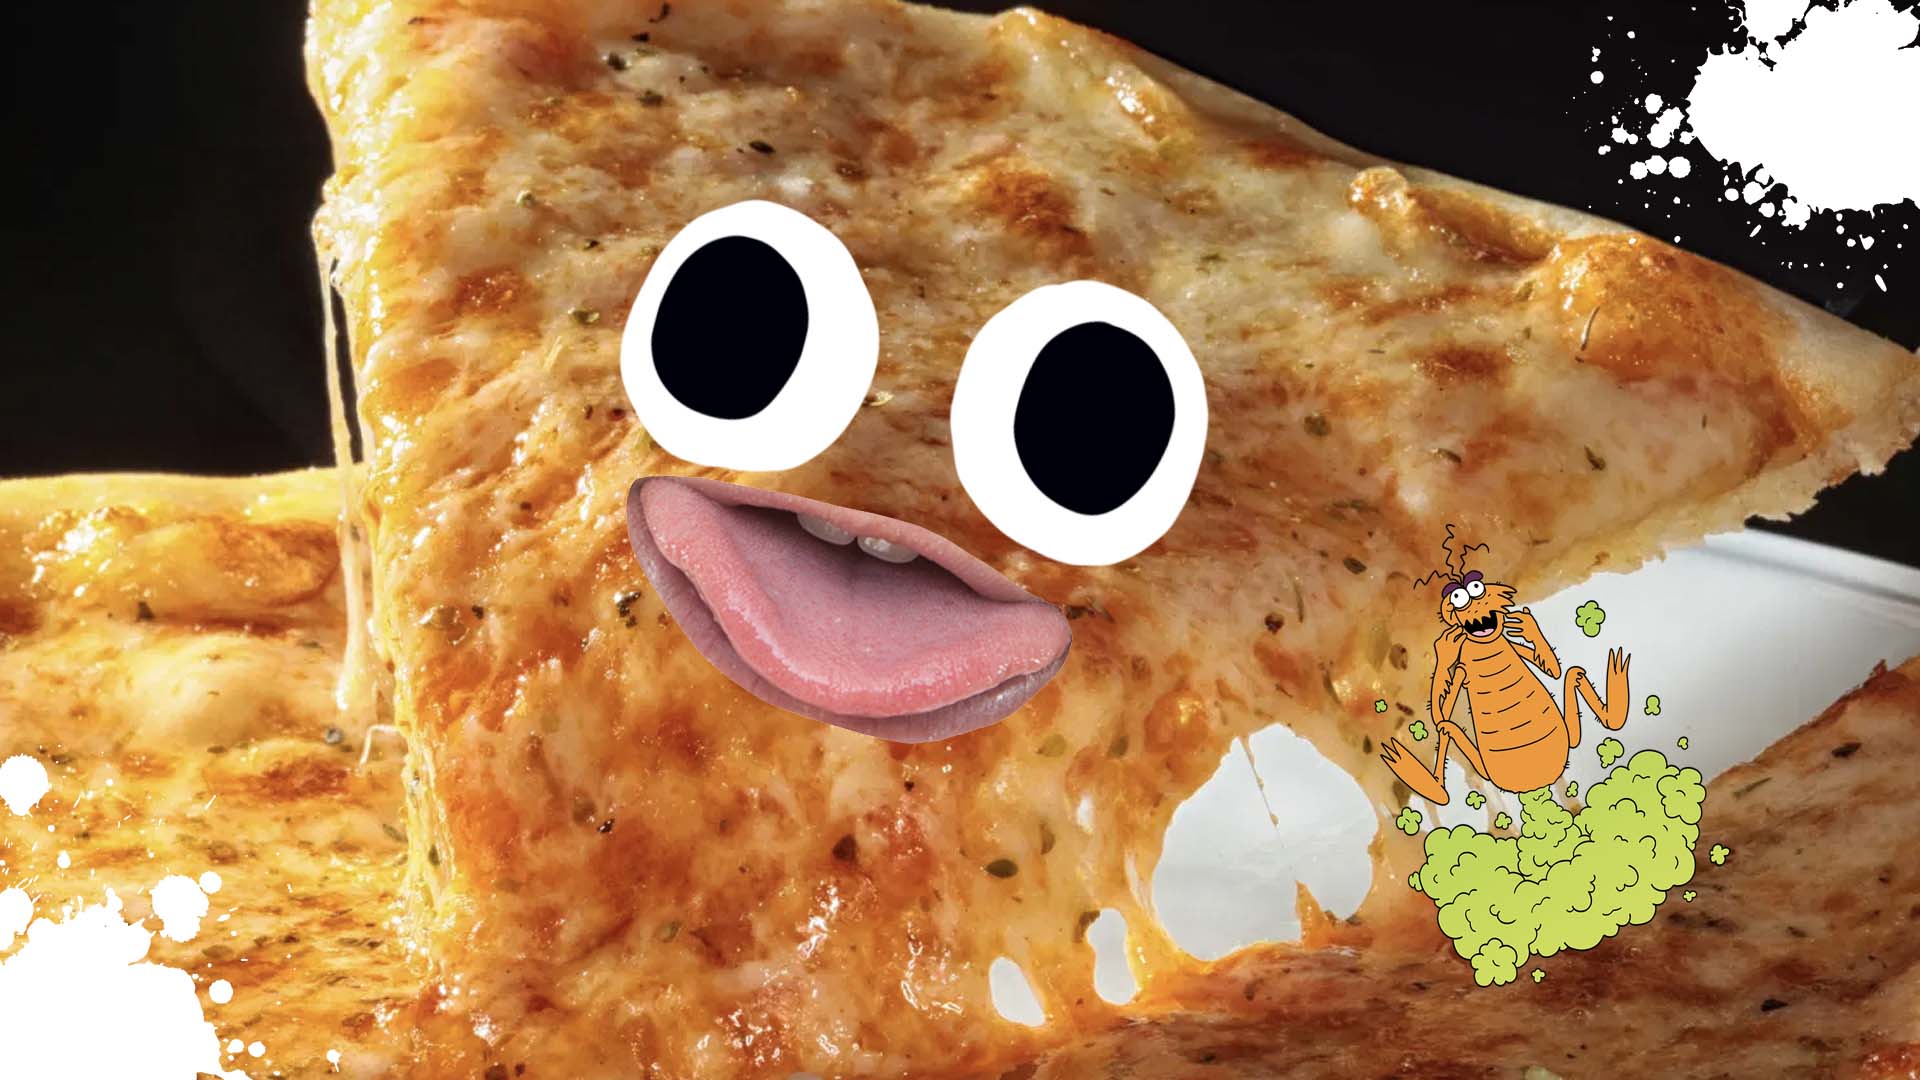 A stink flea looking at a tasty pizza